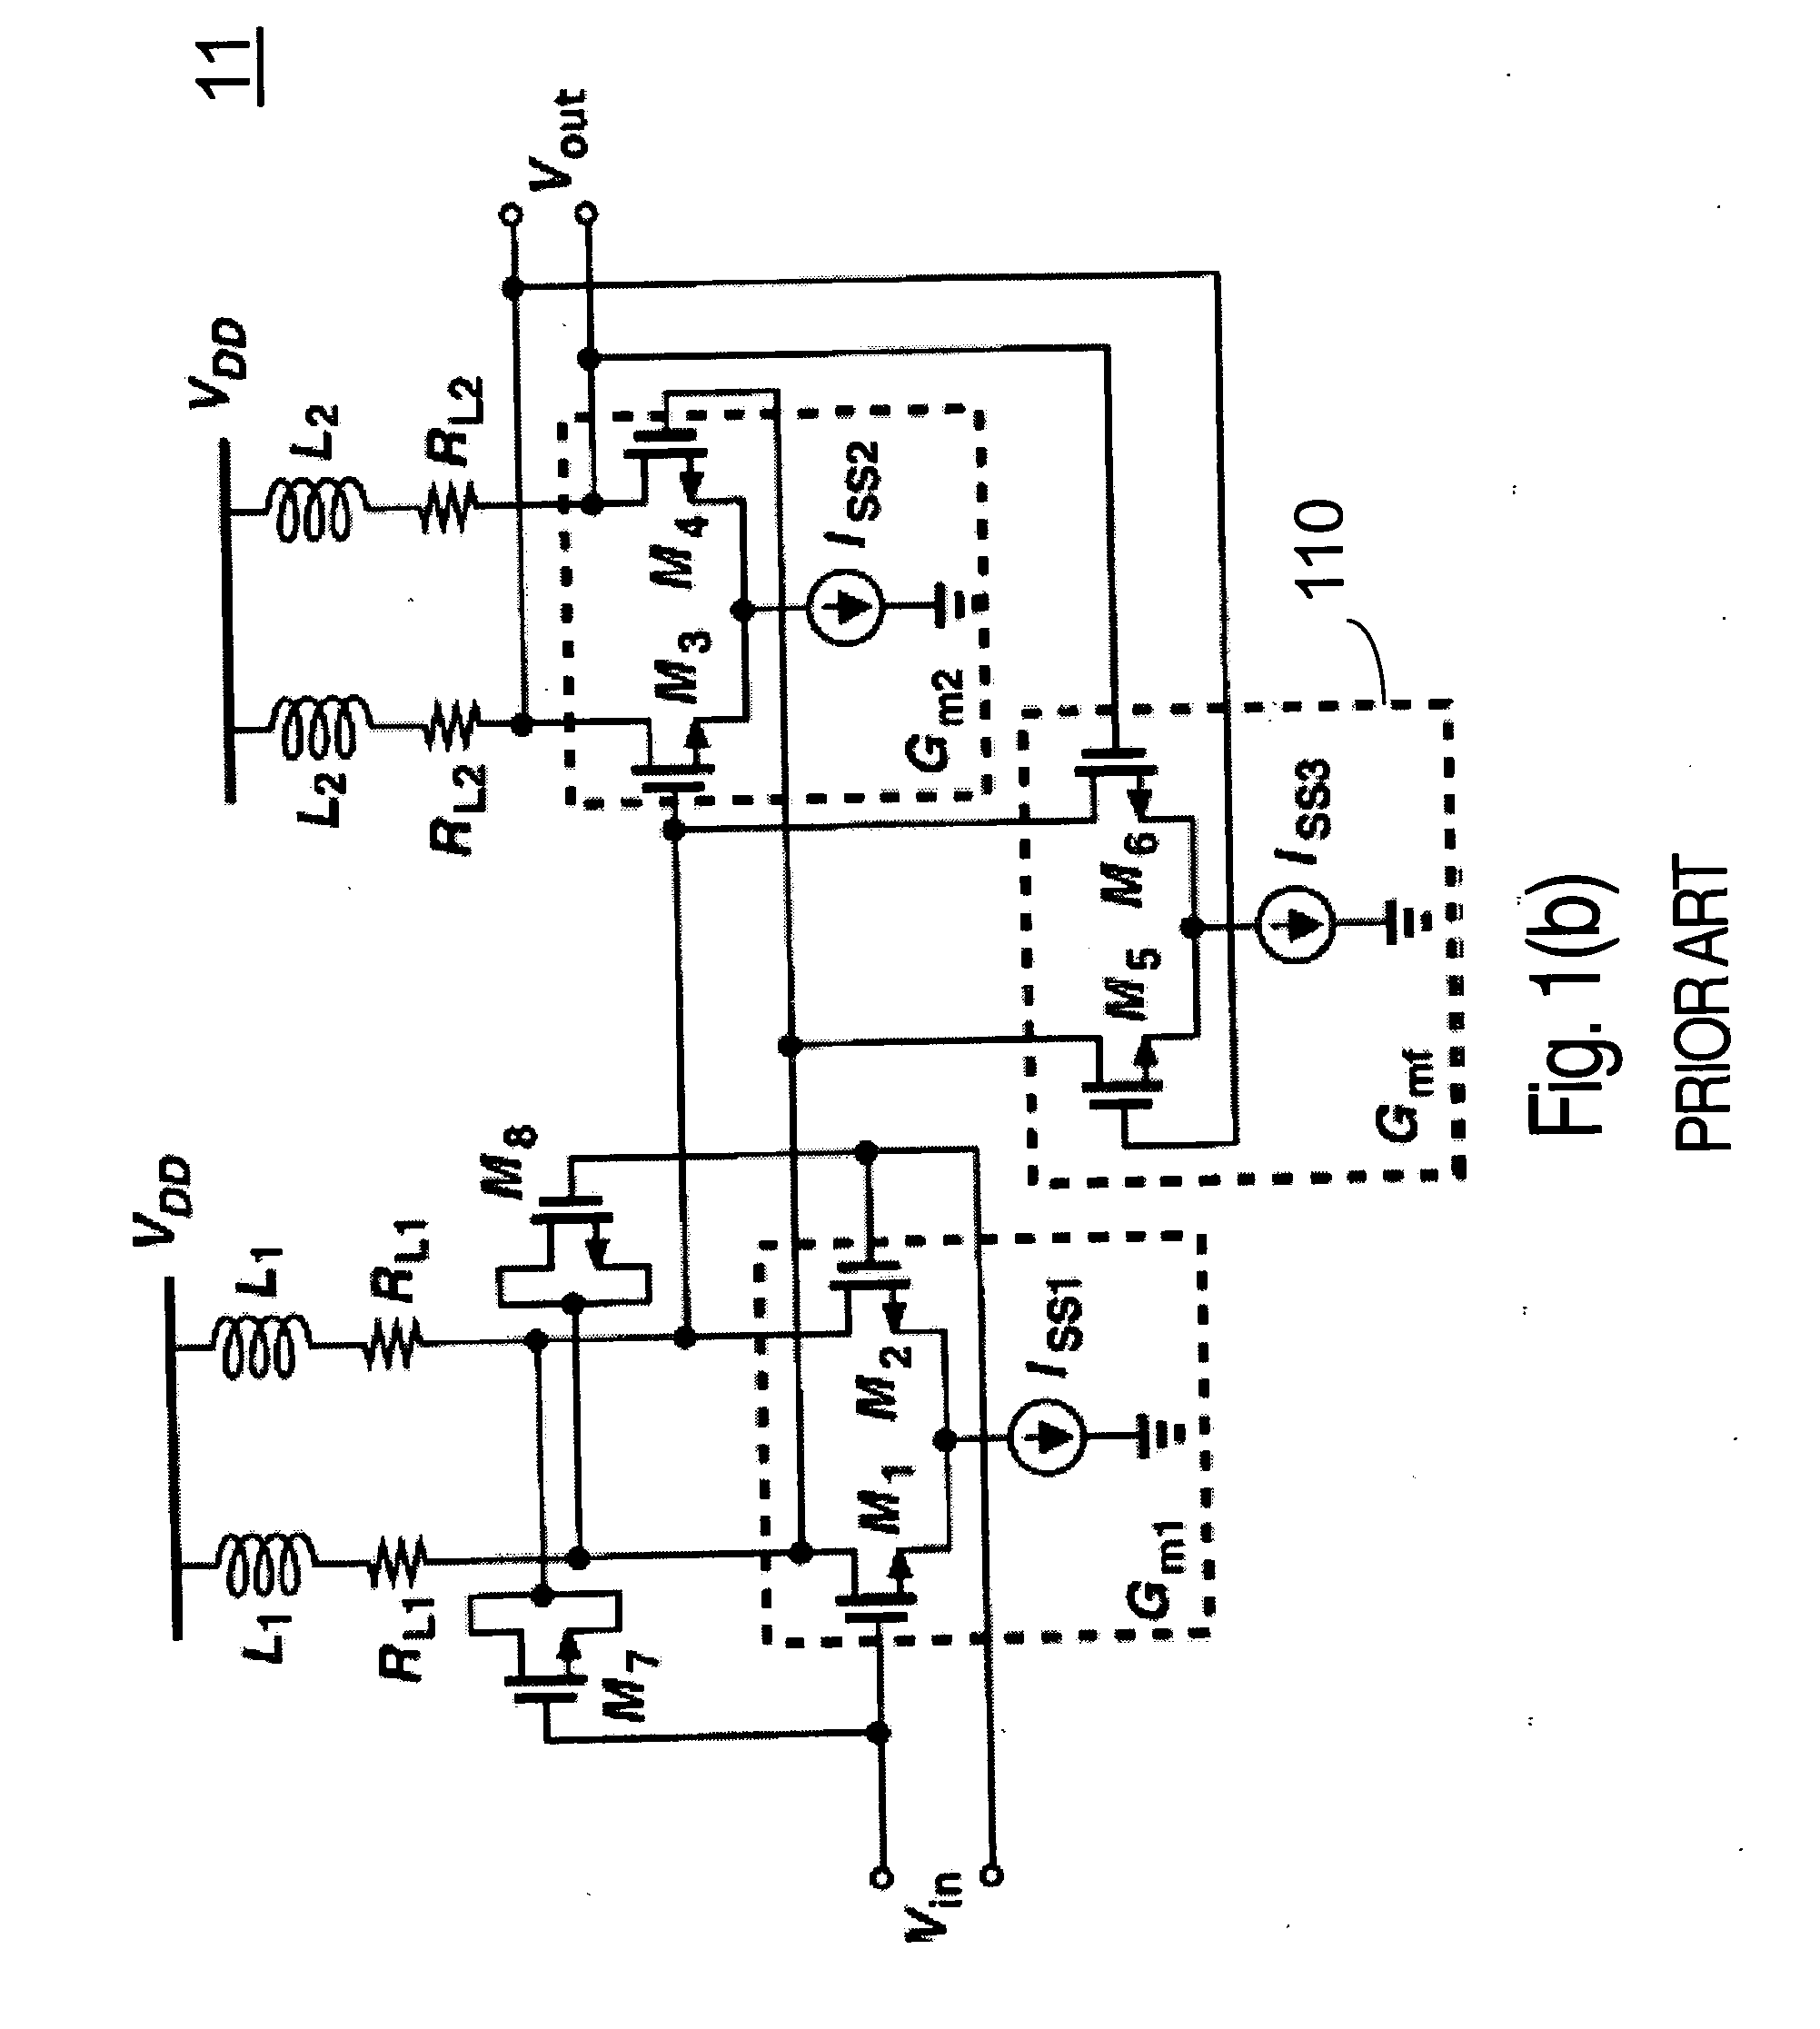 Transmission circuit for use in input/output interface